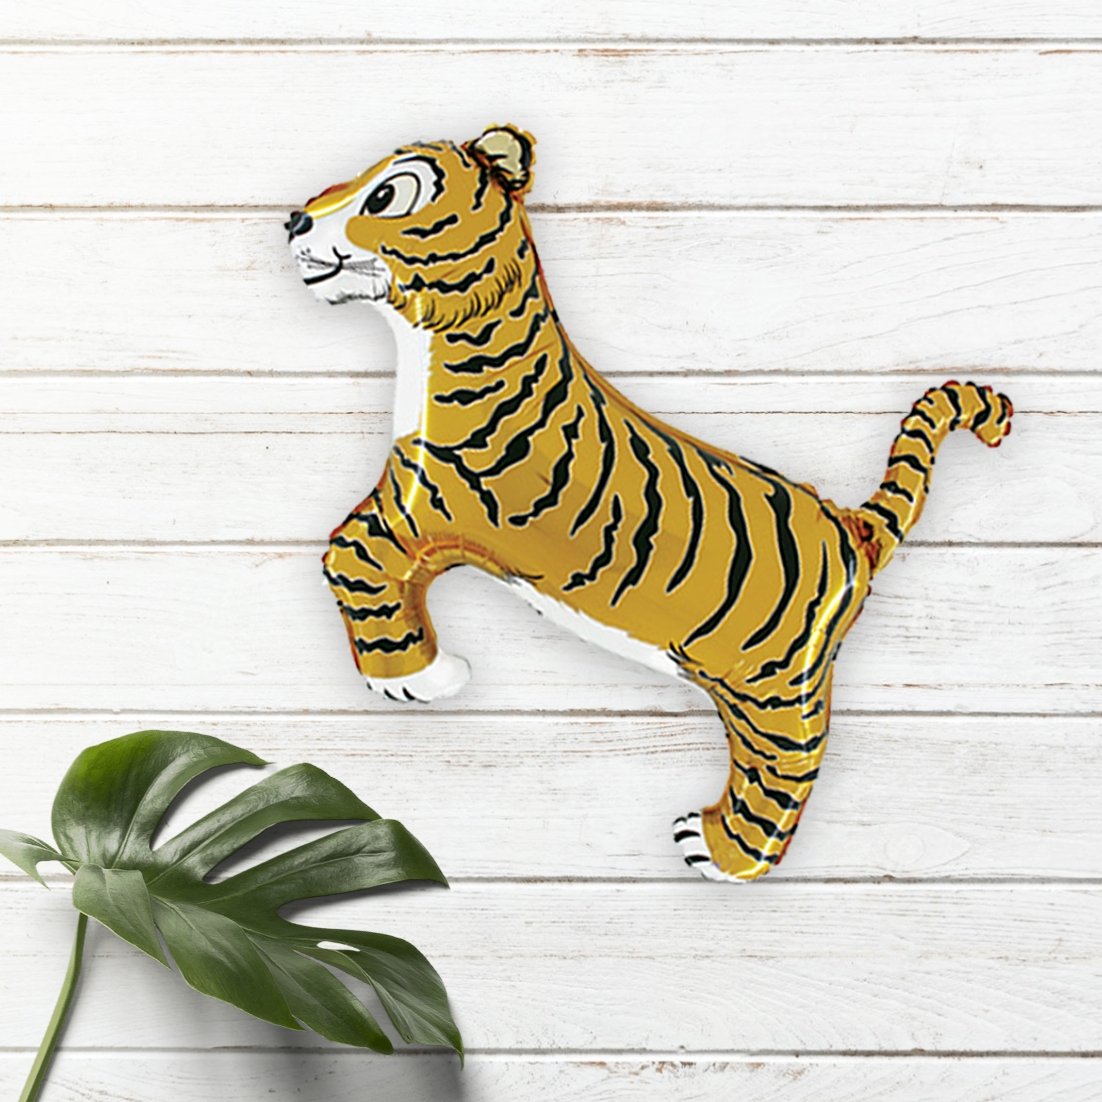 Giant Safari Tiger Mylar Balloon (41 Inches) - Ellie's Party Supply